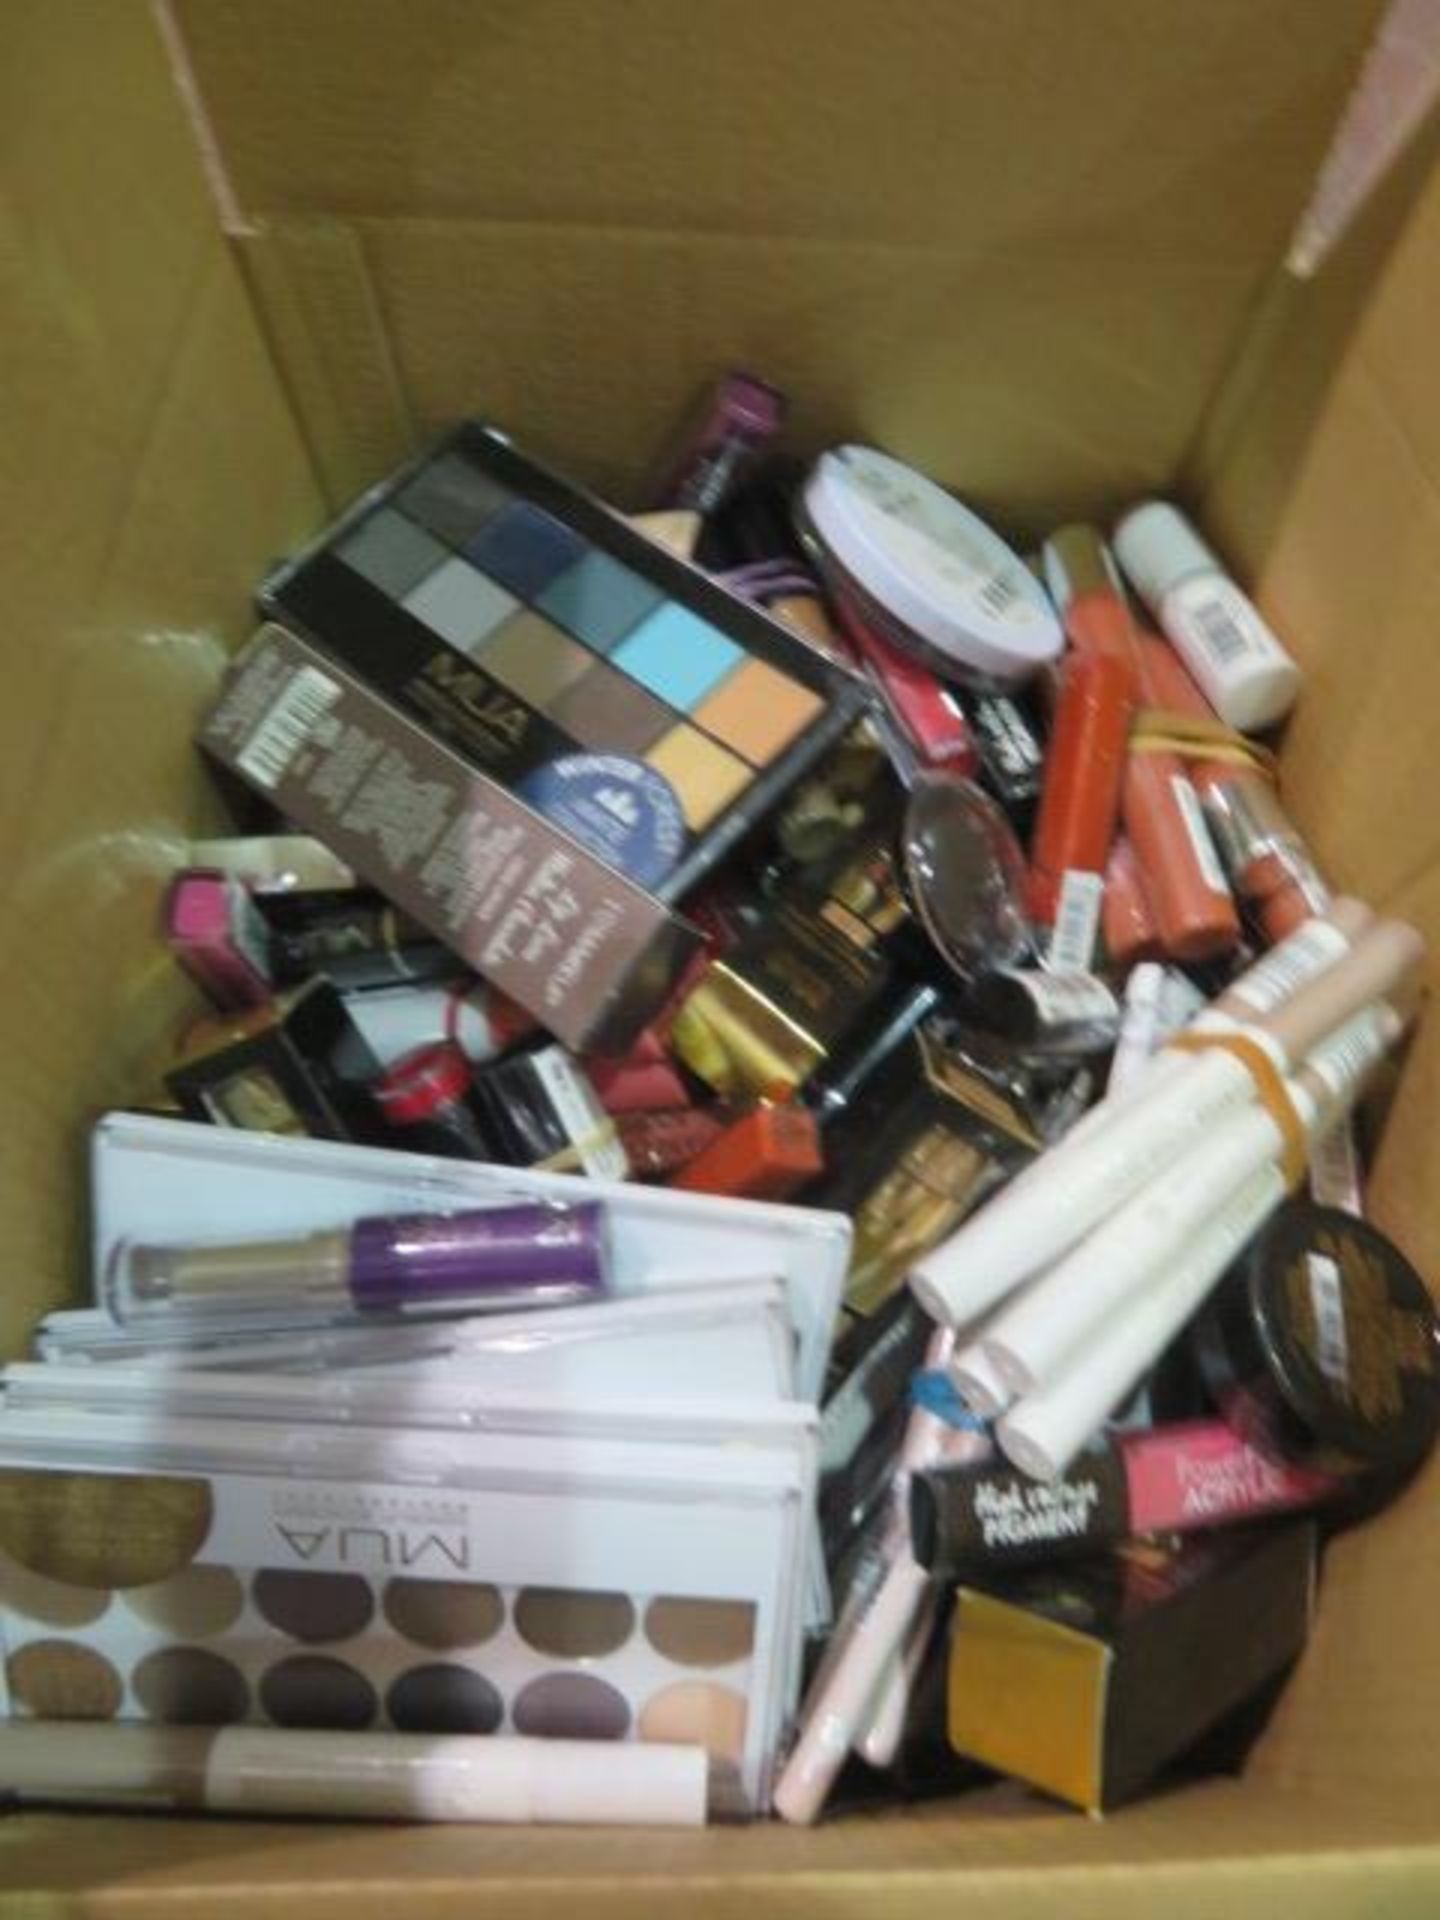 Circa. 200 items of various new make up acadamy make up to include: salted caramel lip lava,